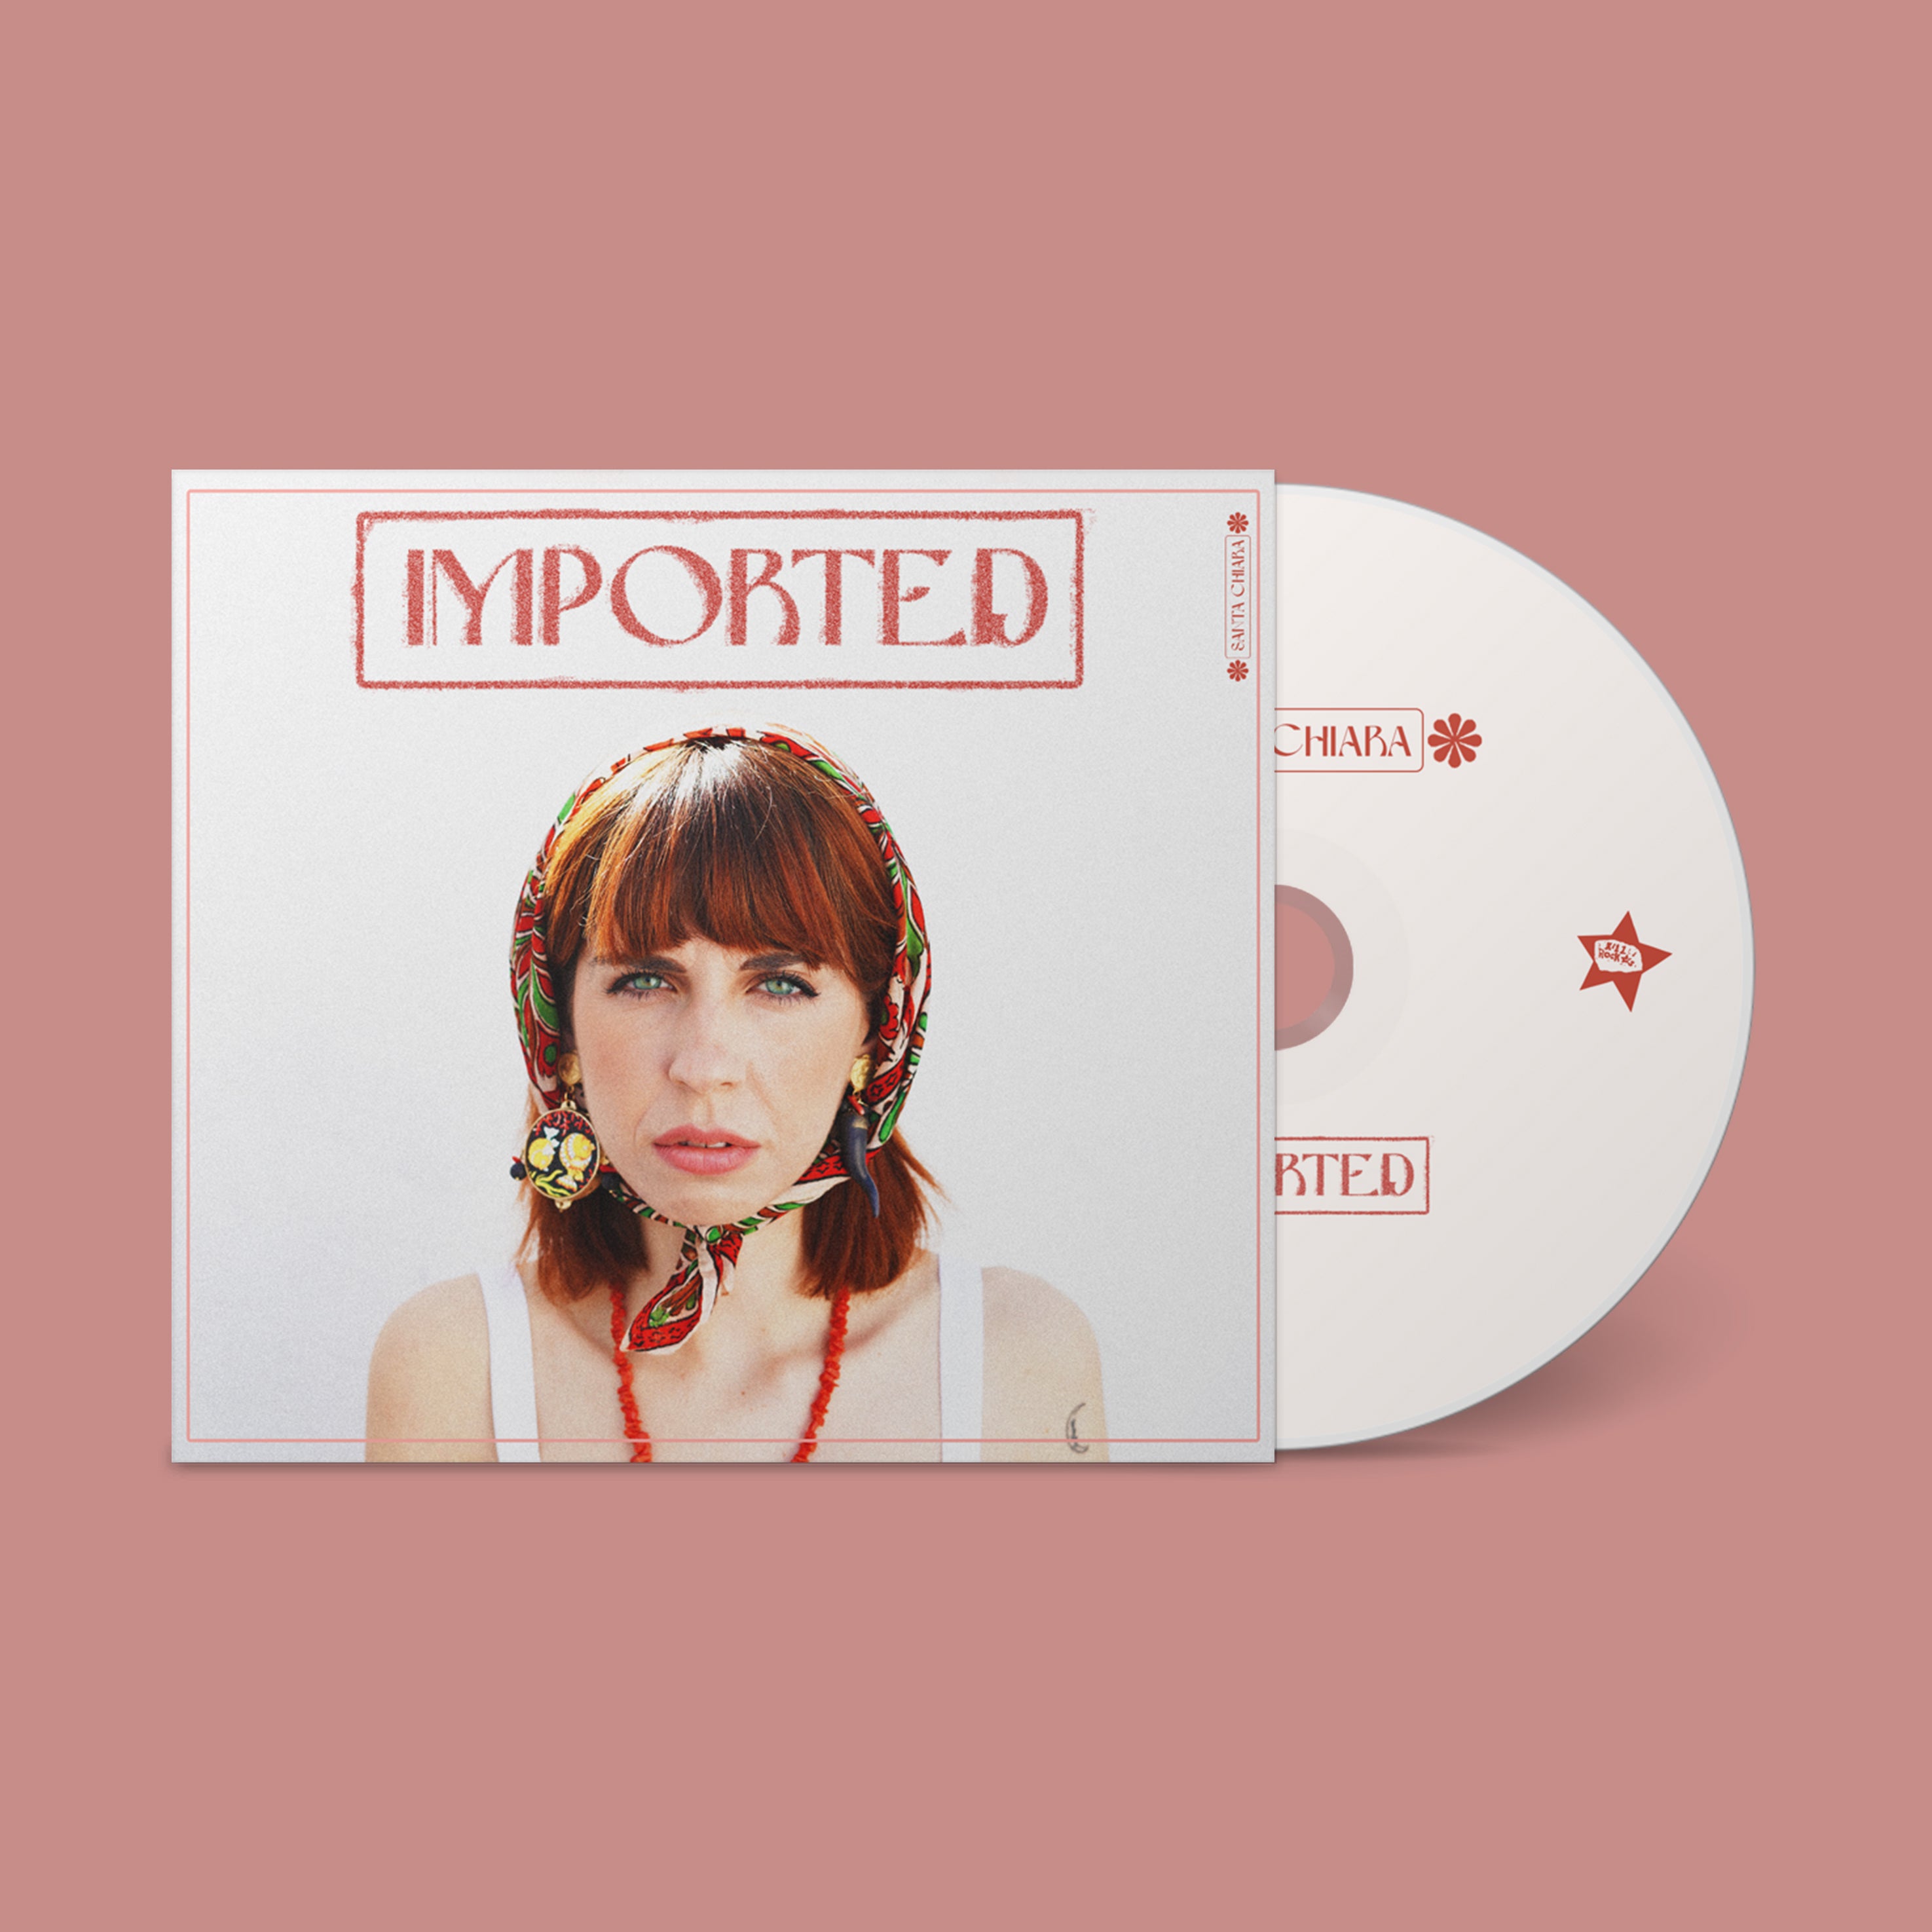 ** PRE-ORDER ** IMPORTED